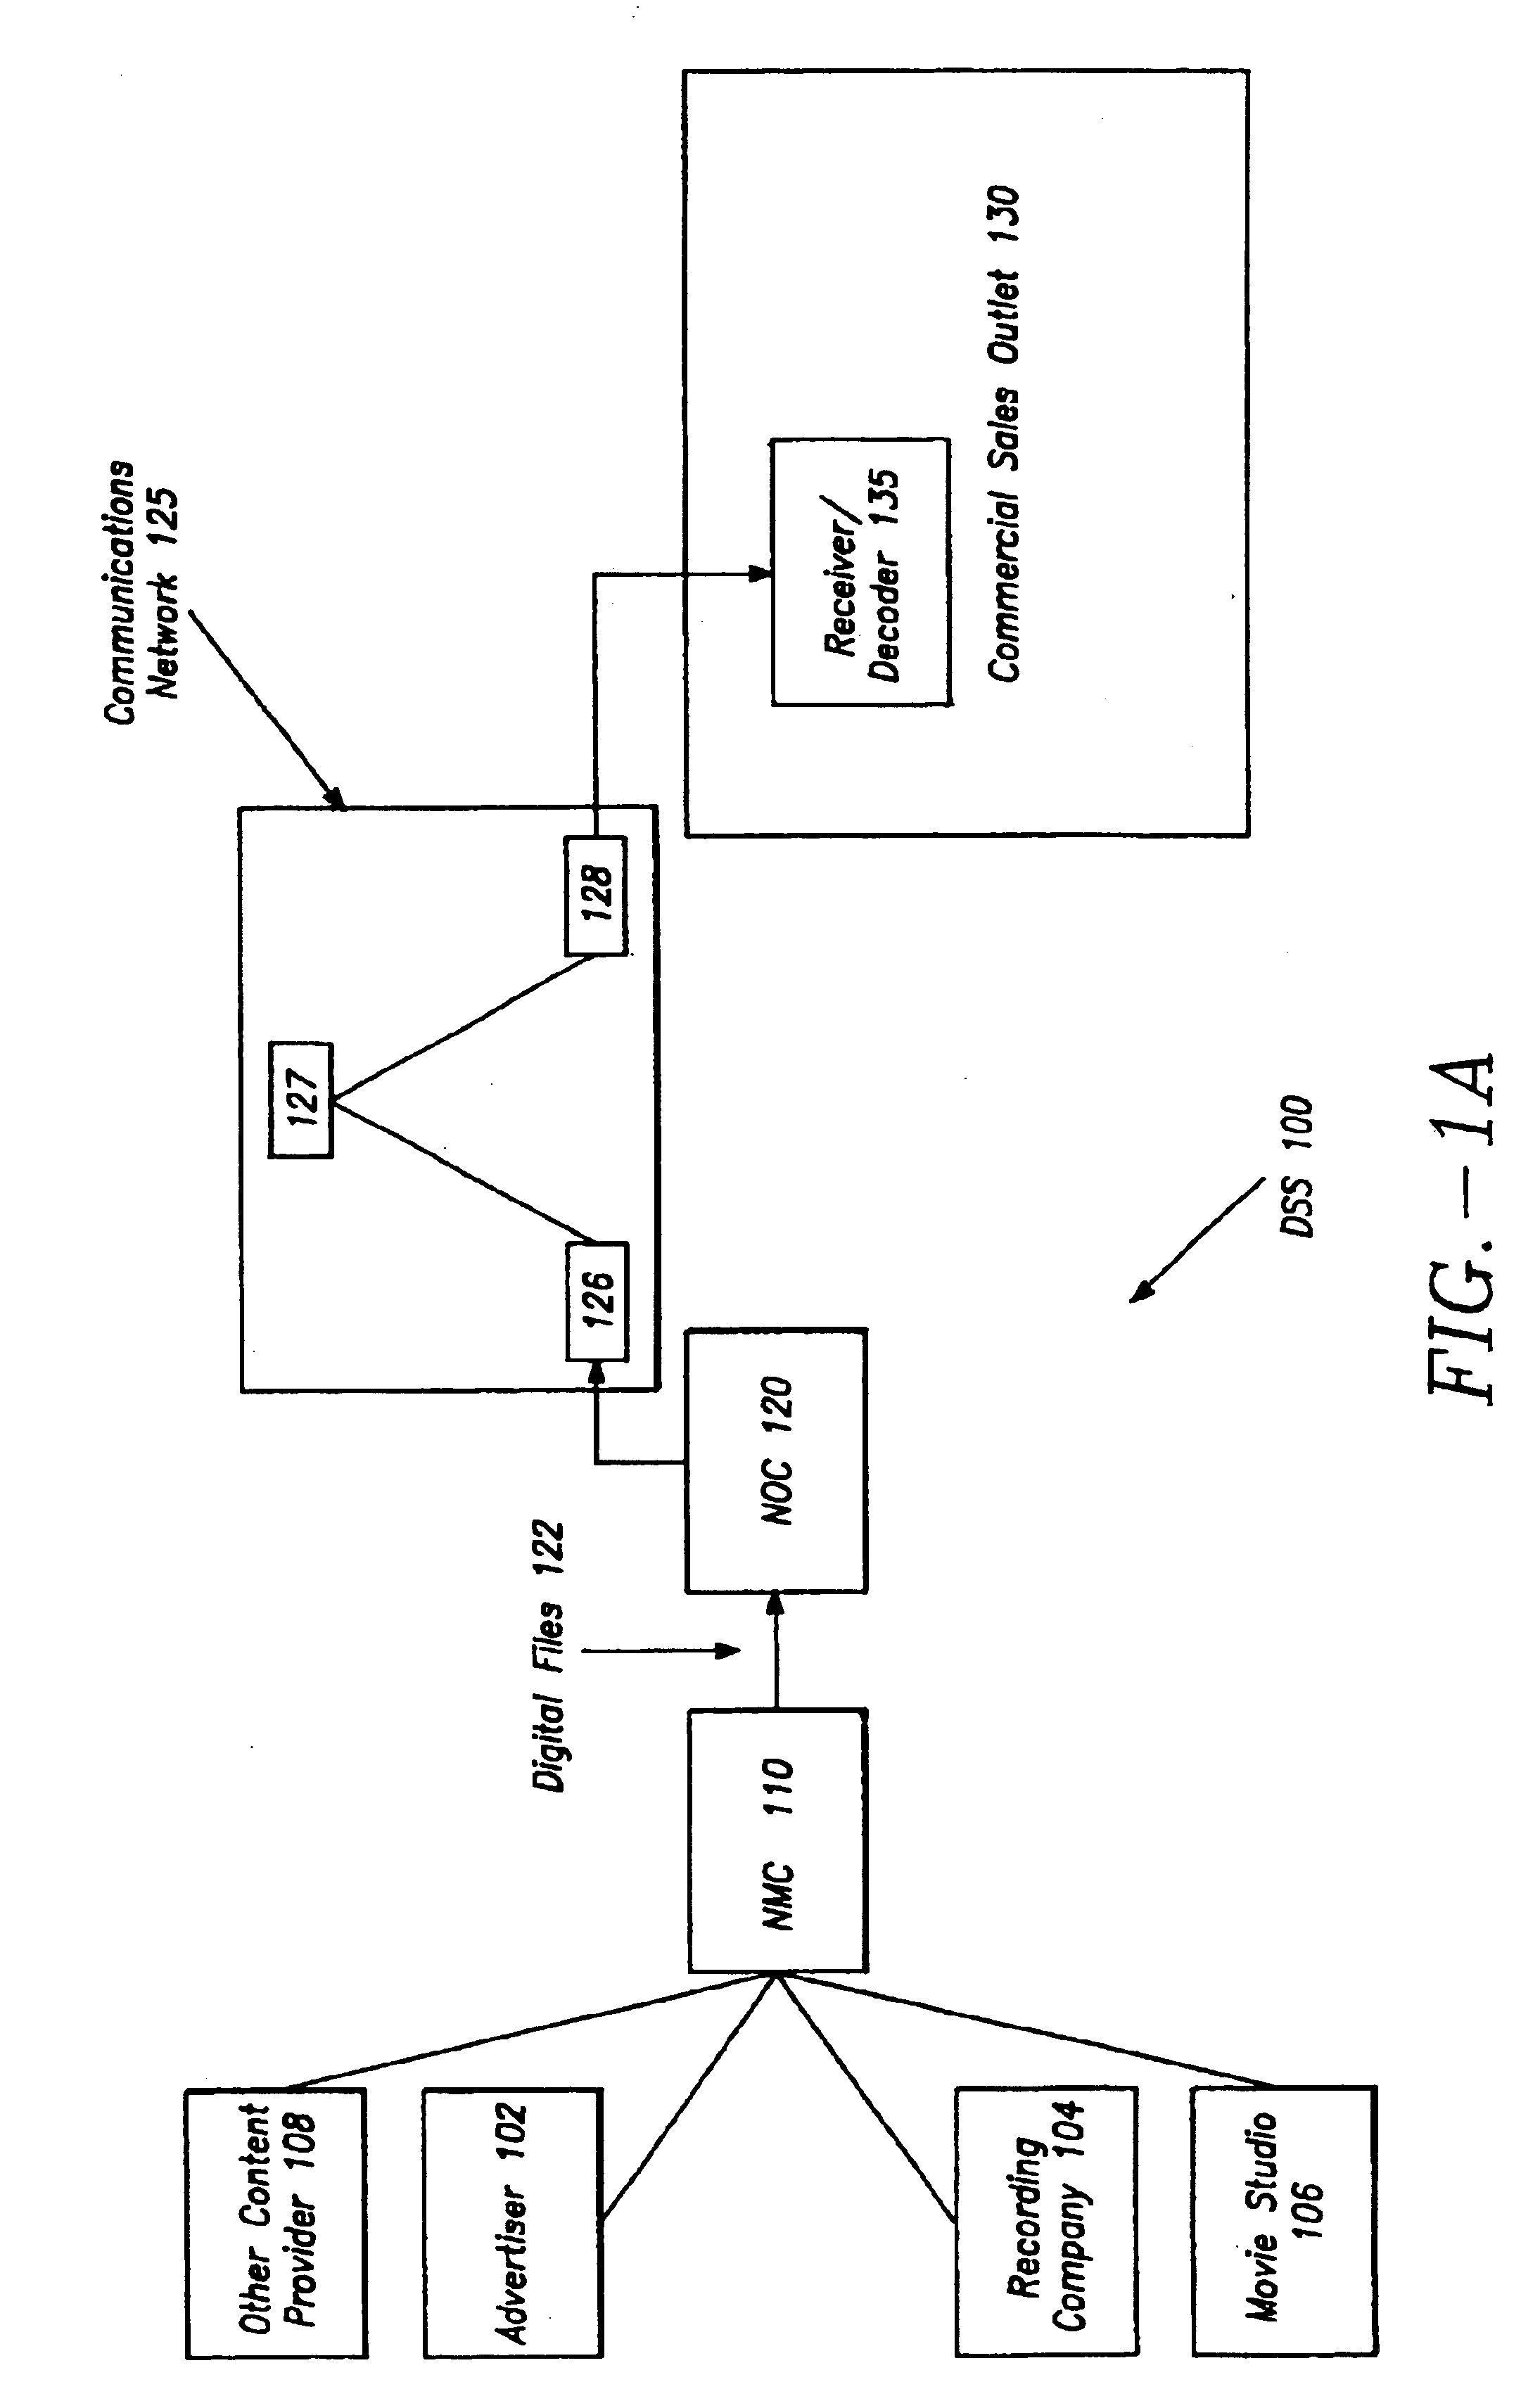 Method and apparatus for gathering statistical information about in-store content distribution